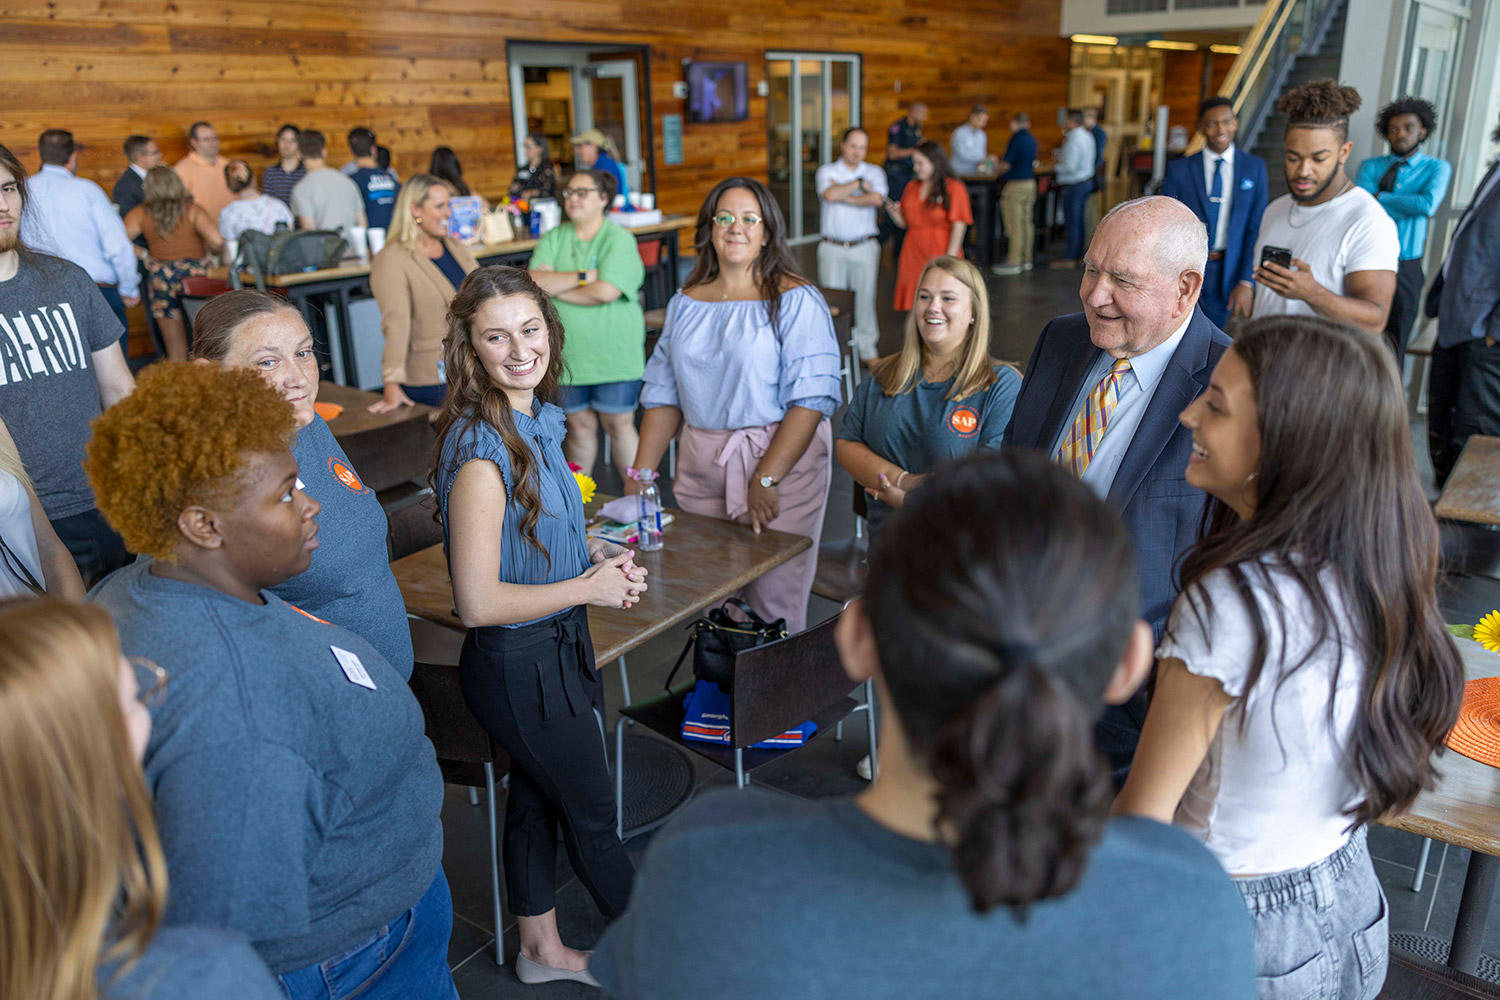 USG Chancellor Sonny Perdue with members of the Student Ambassador Program